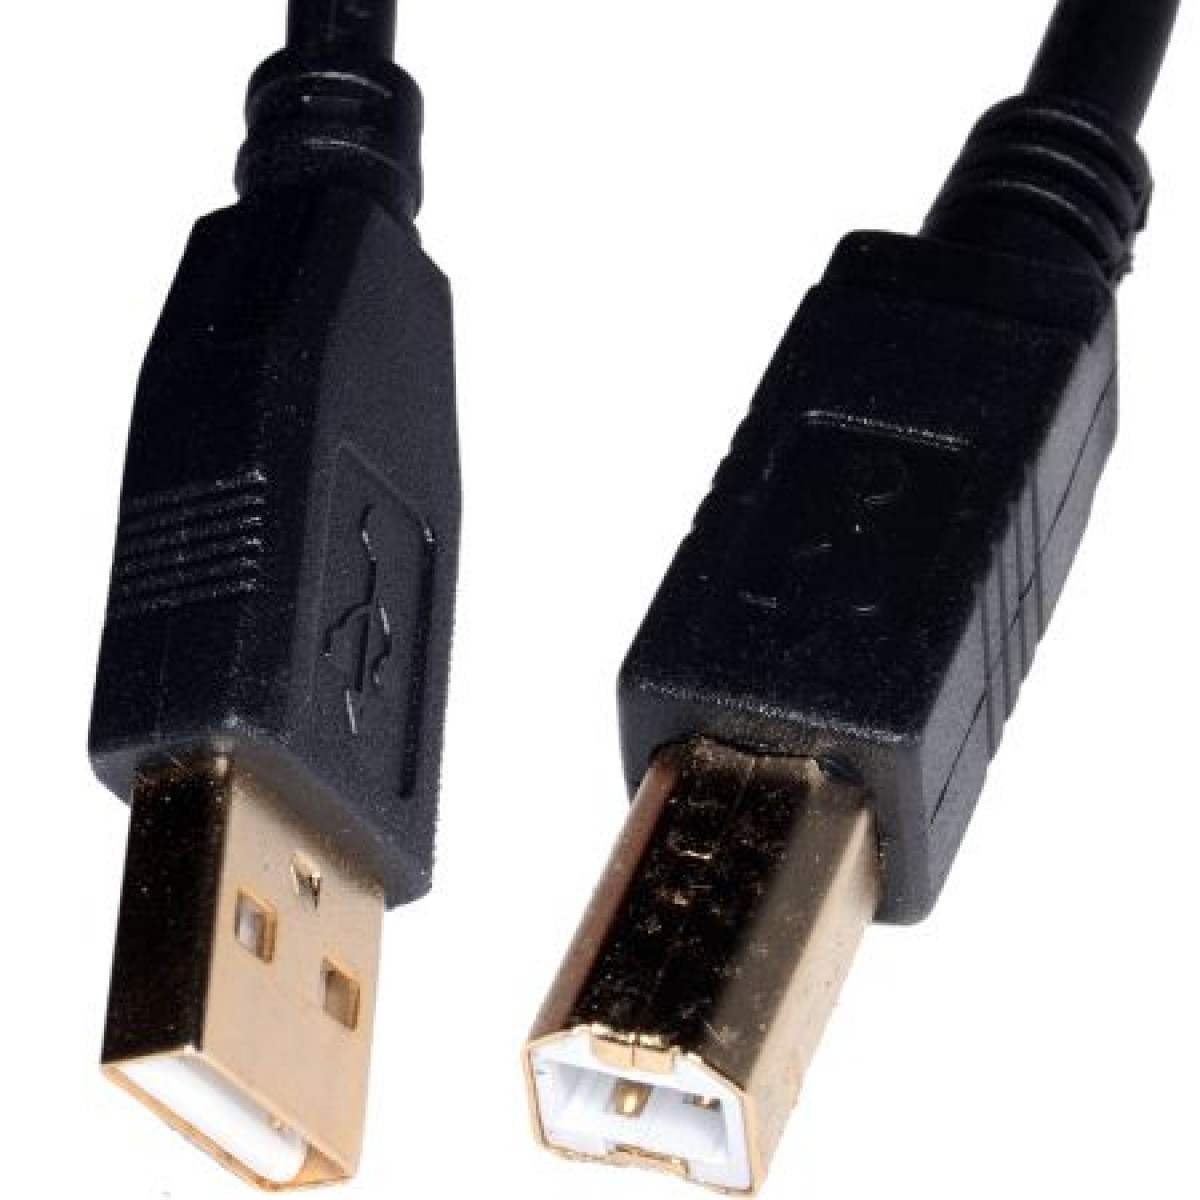 1M USB 2.0 A to B Cable Lead Cord for Connecting Printer ...